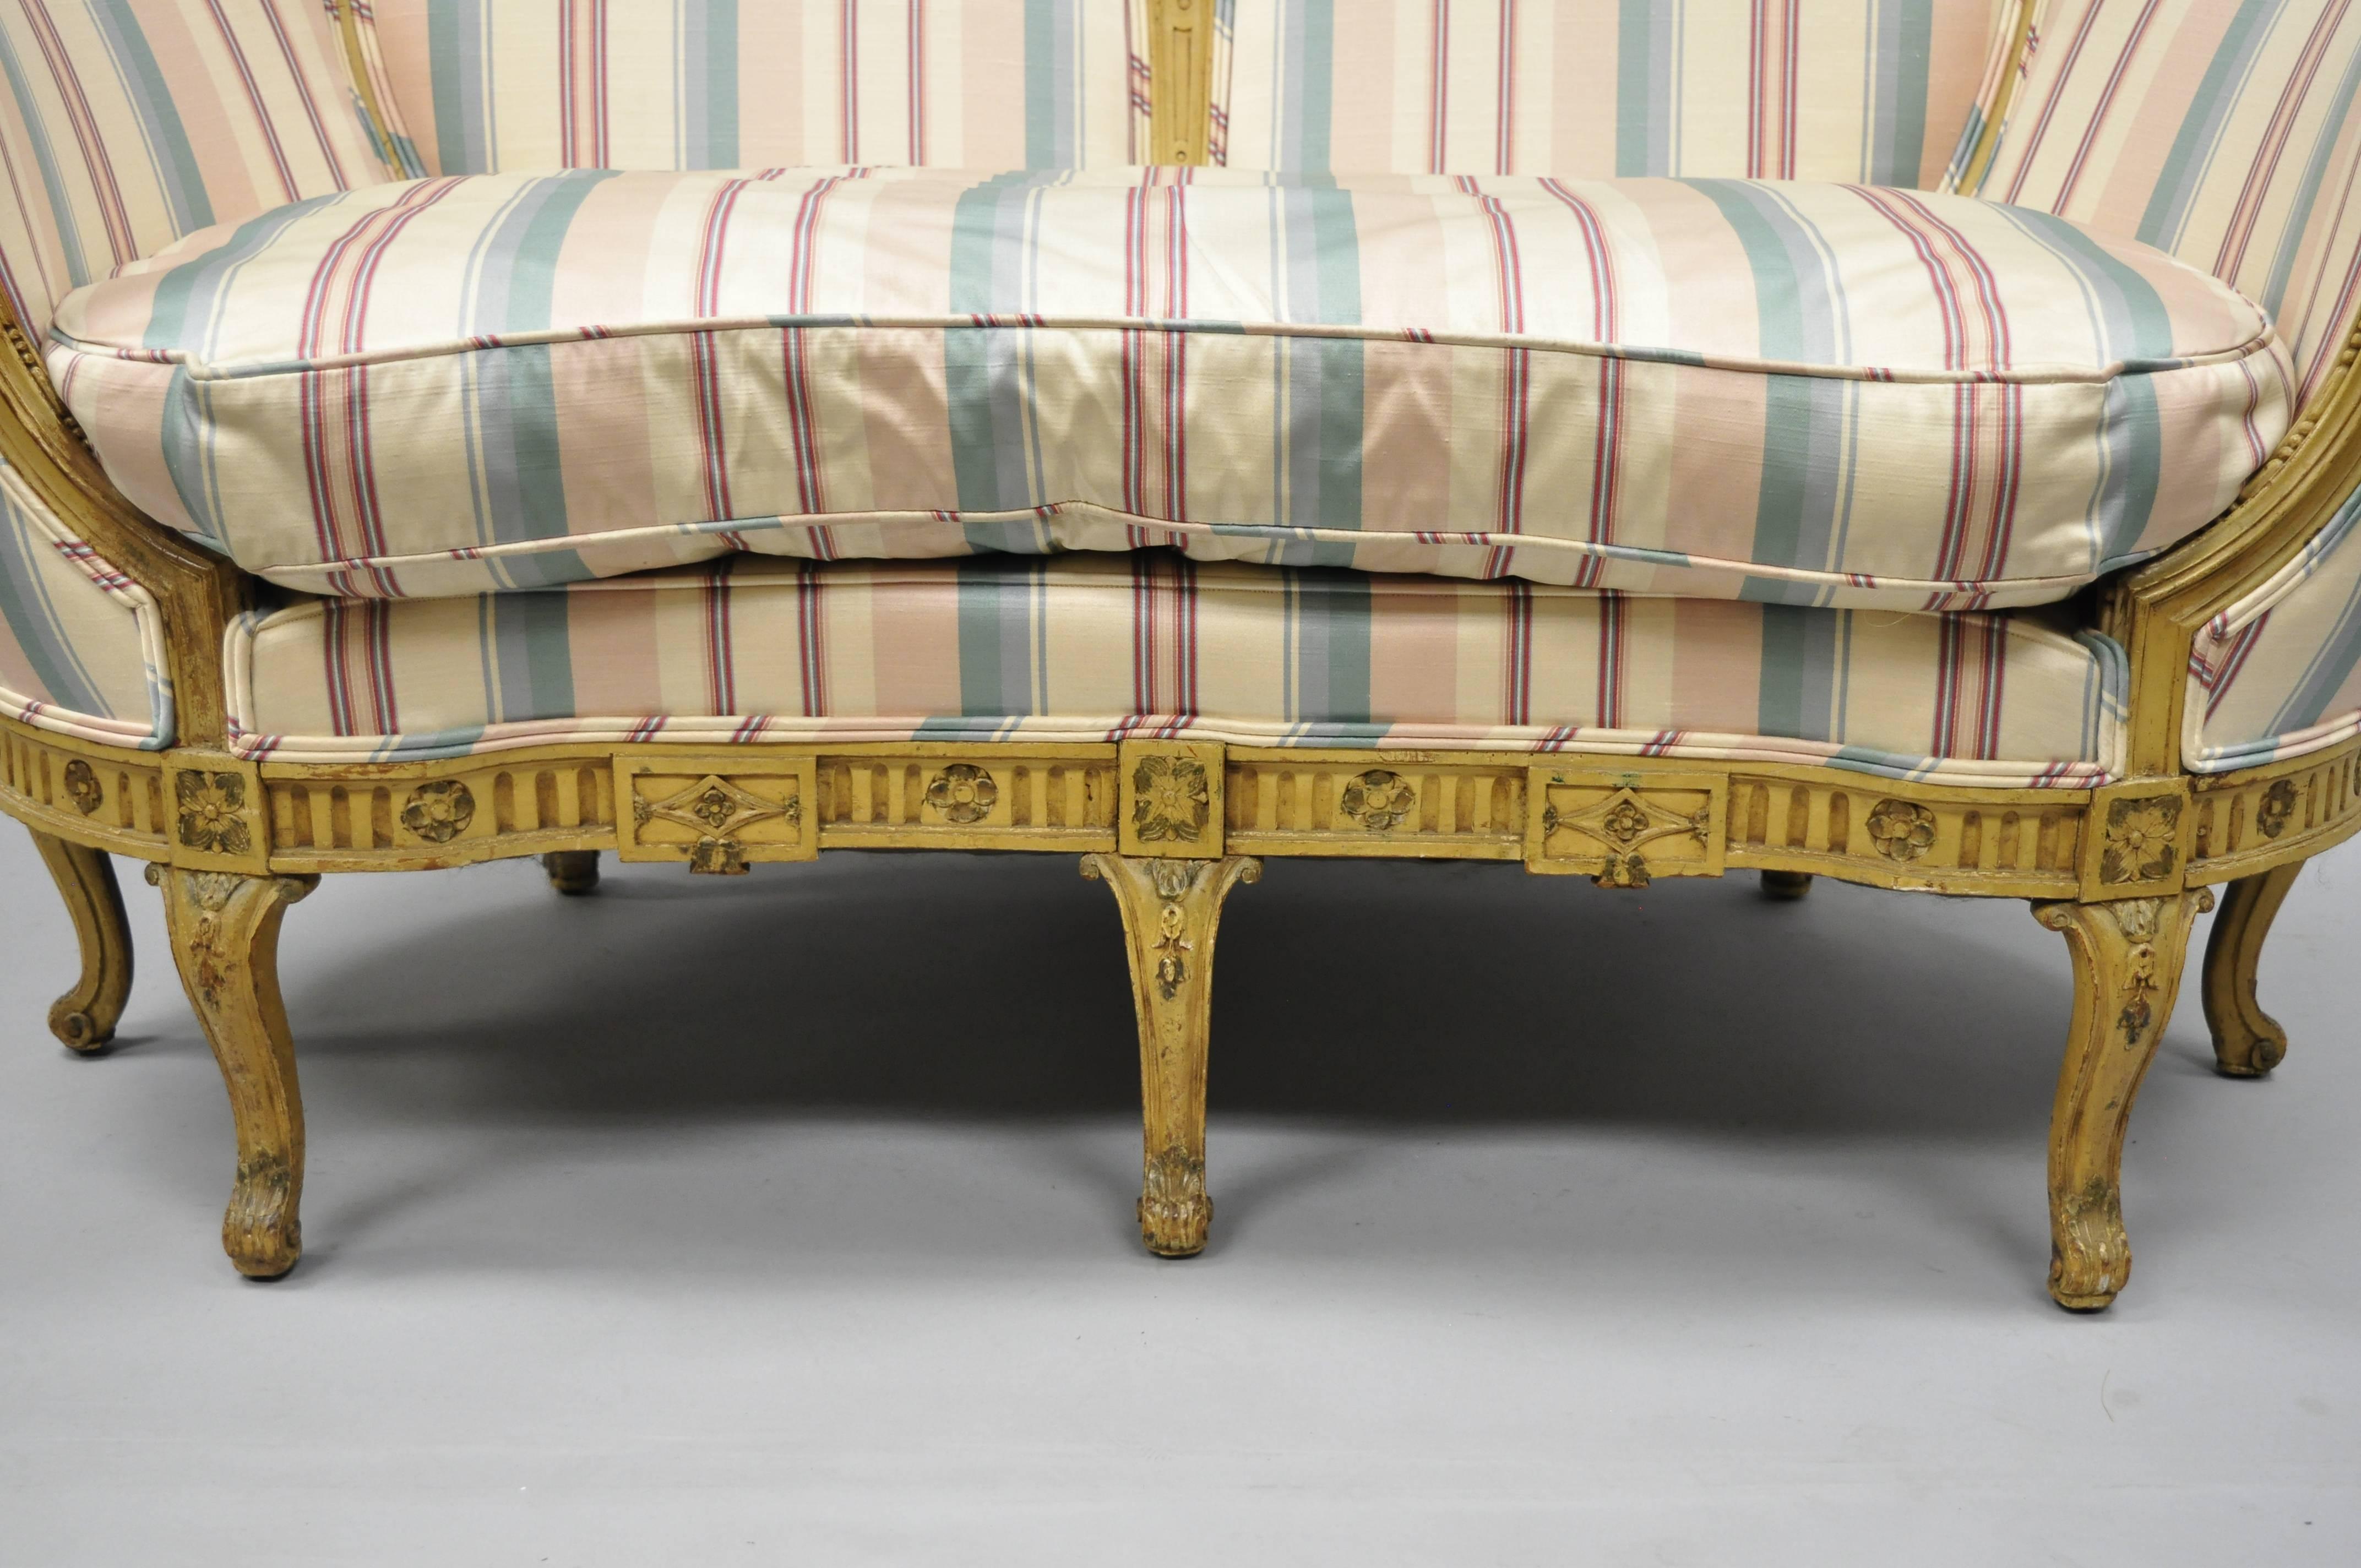 Wood French Regency Style Cream Painted Loveseat Settee Sofa with Swan Carvings